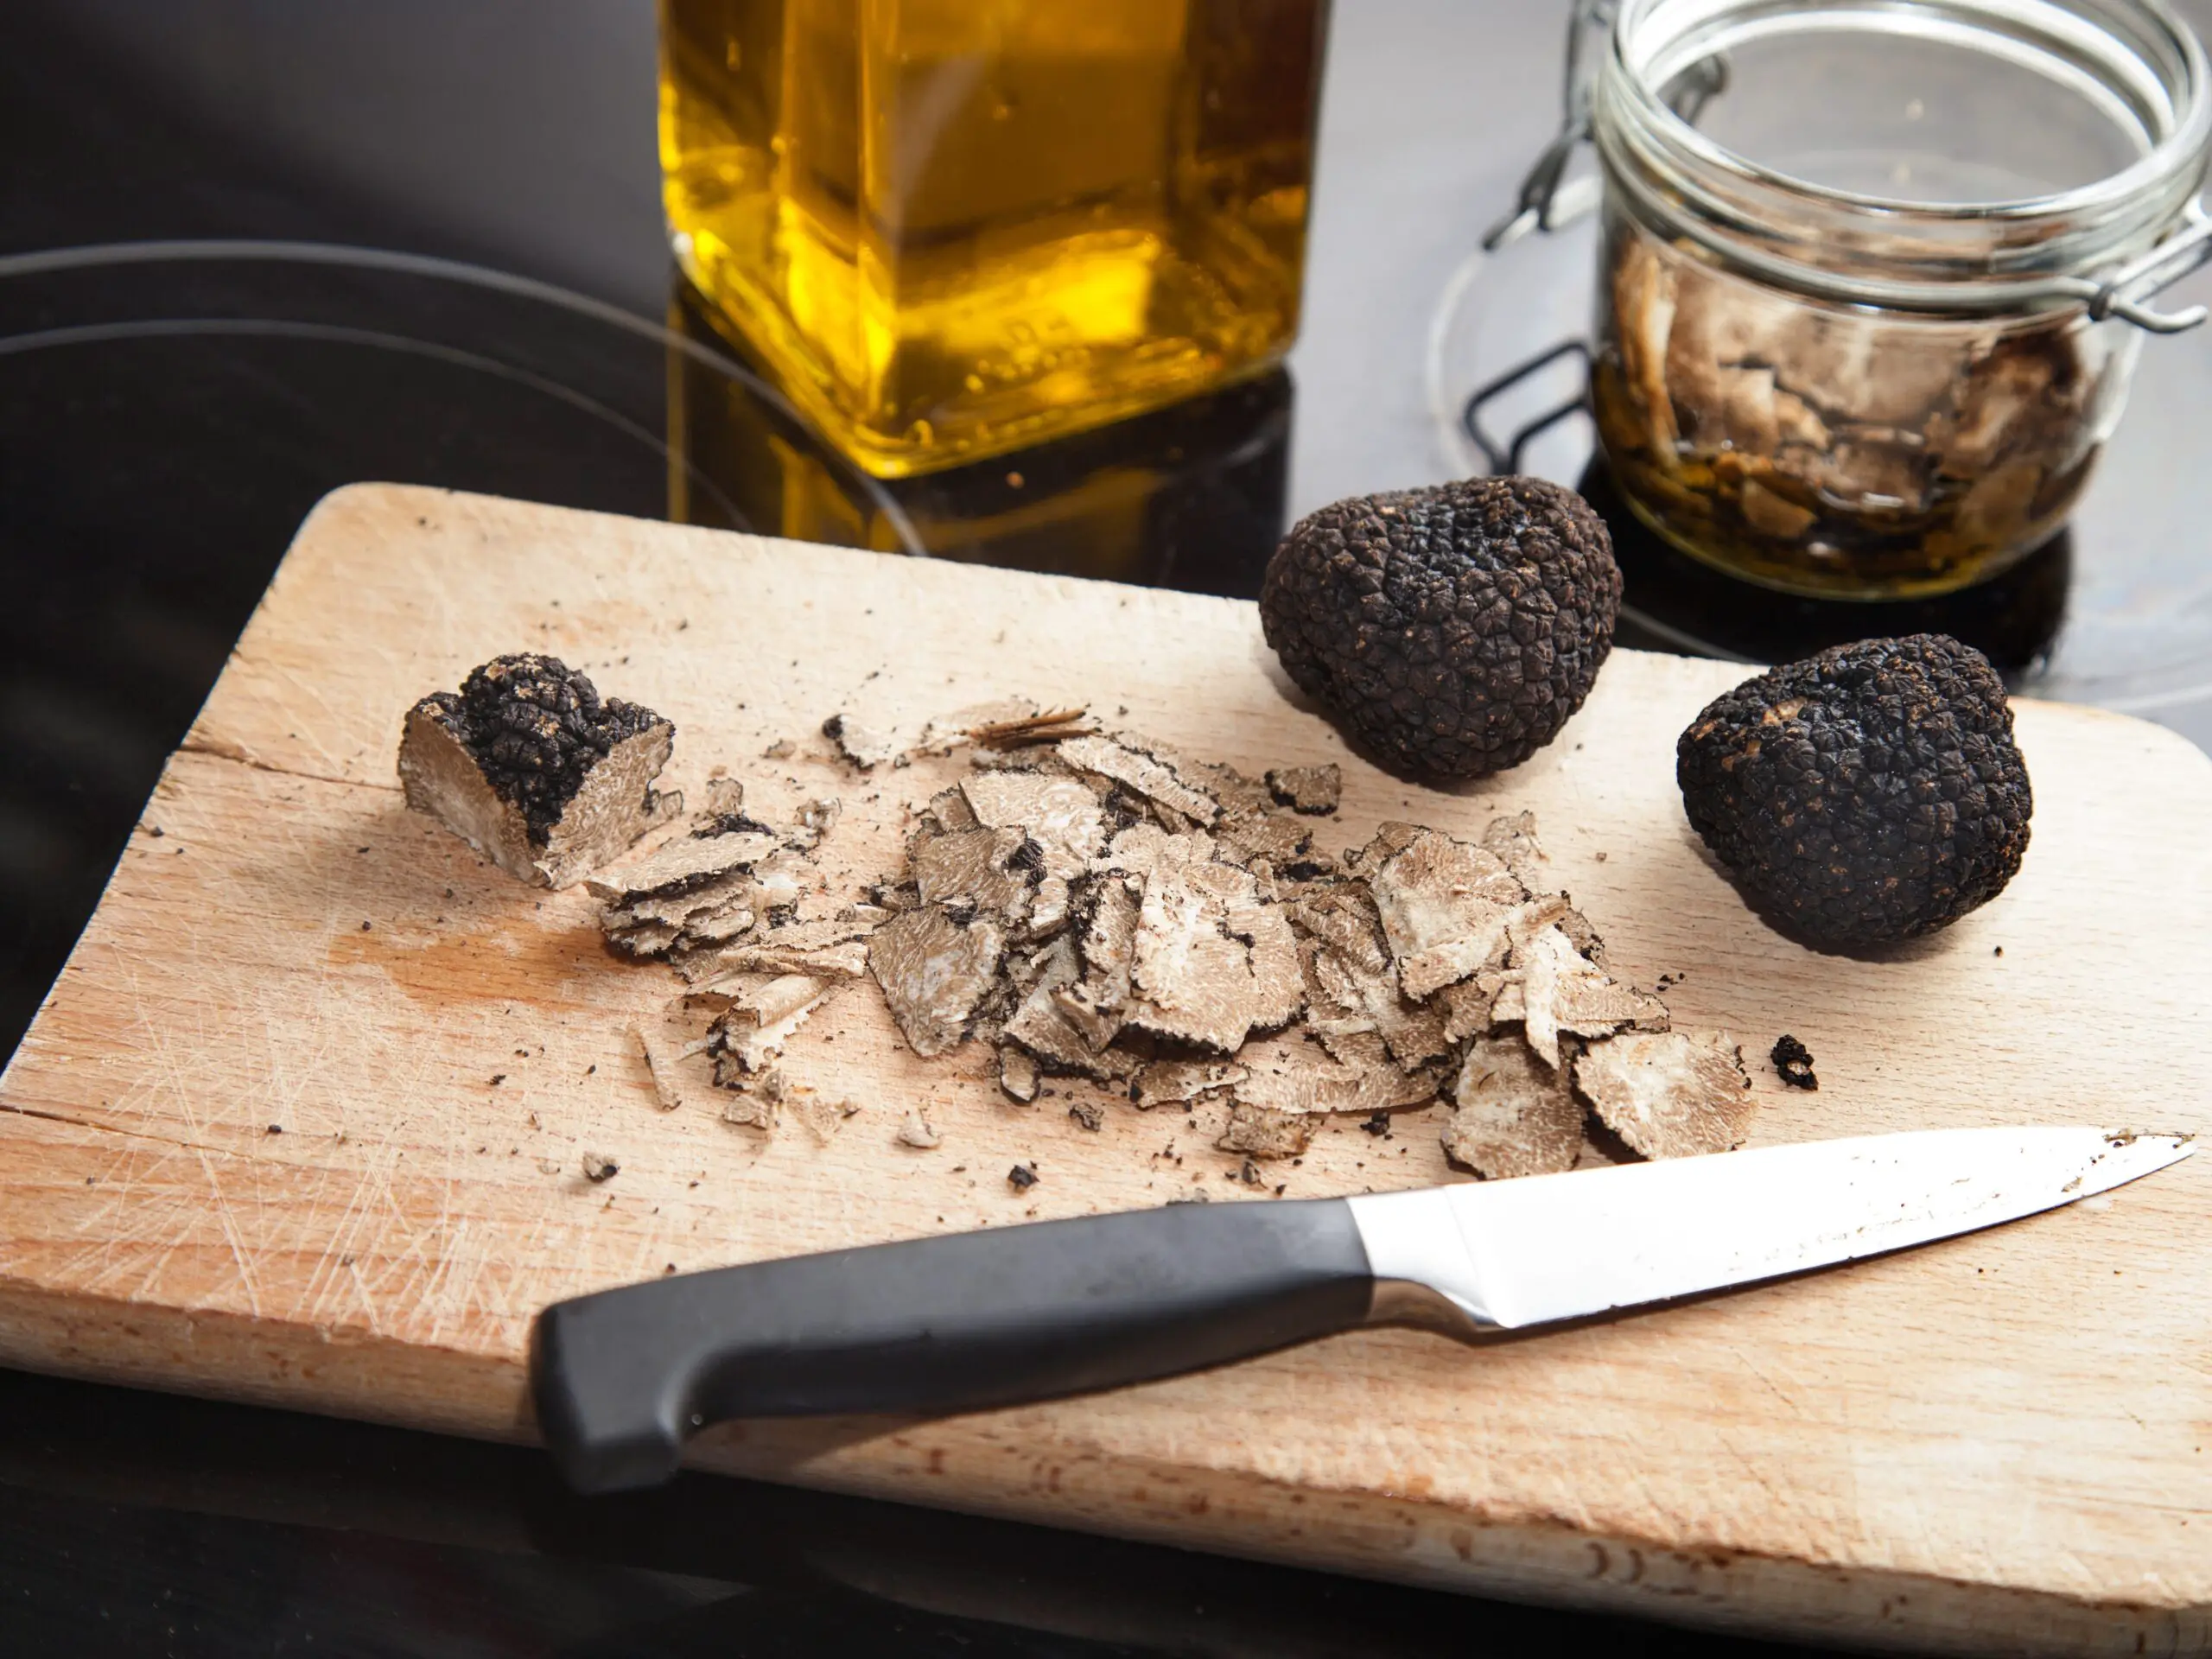 How much do truffles cost?